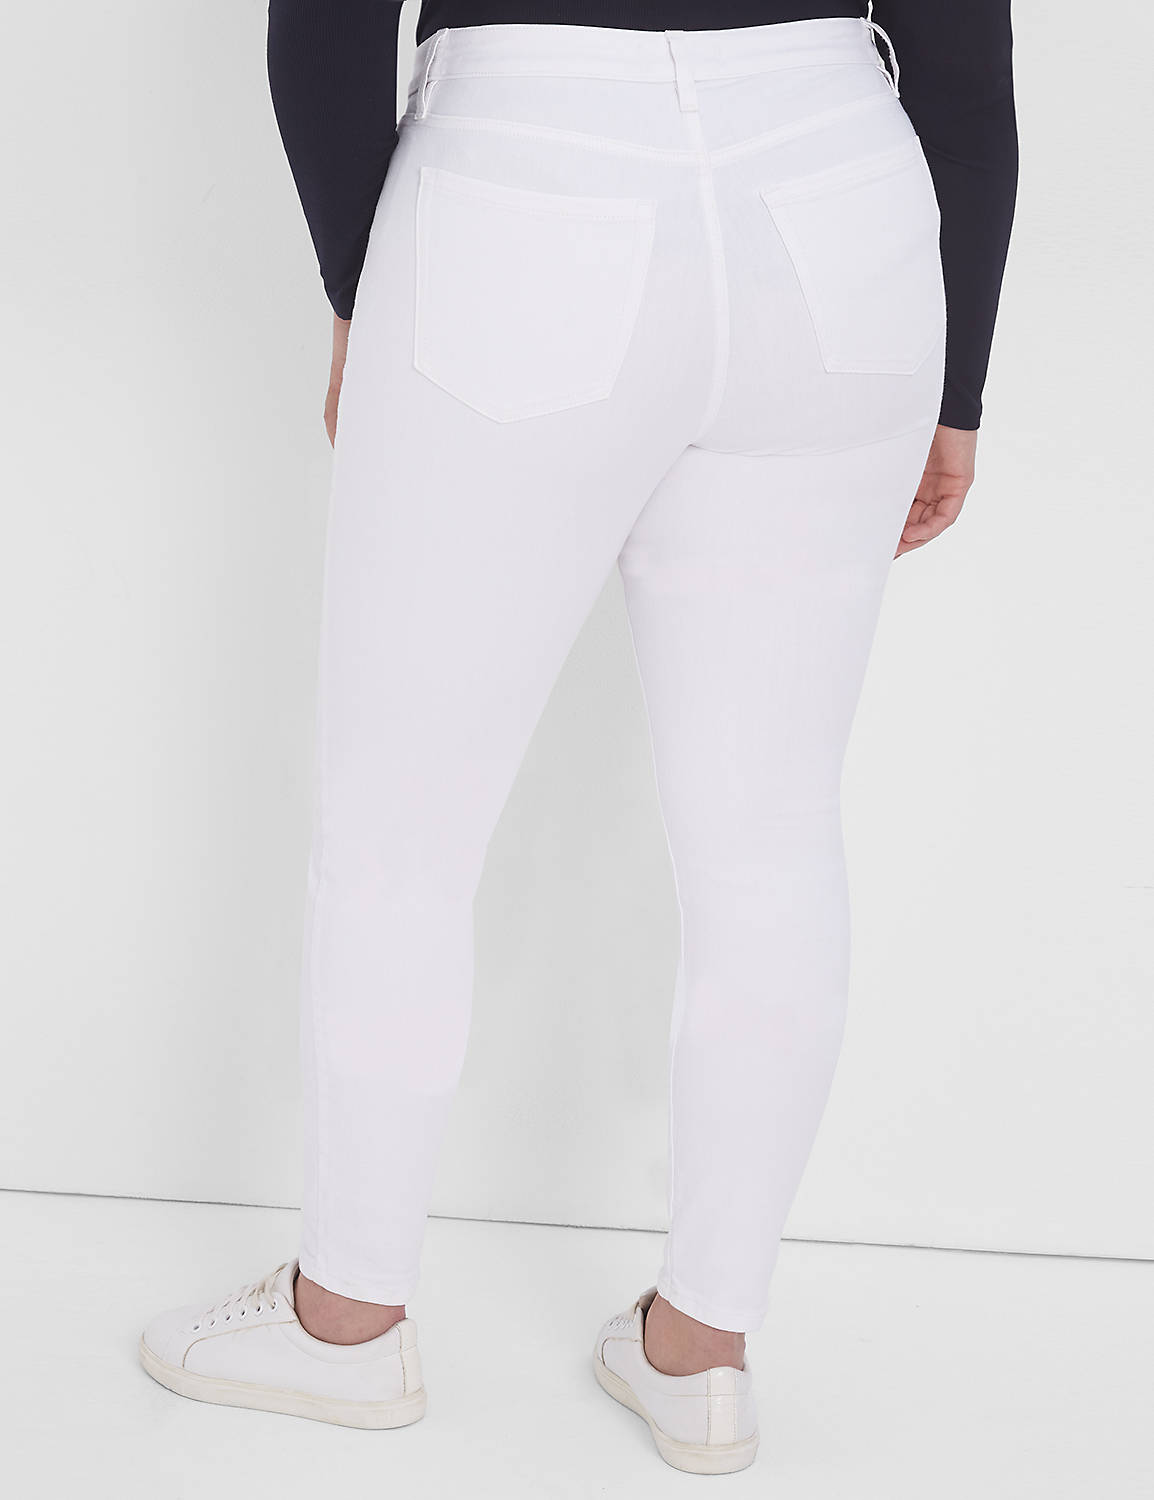 SIGNATURE FIT MID RISE SKINNY - COL Product Image 2